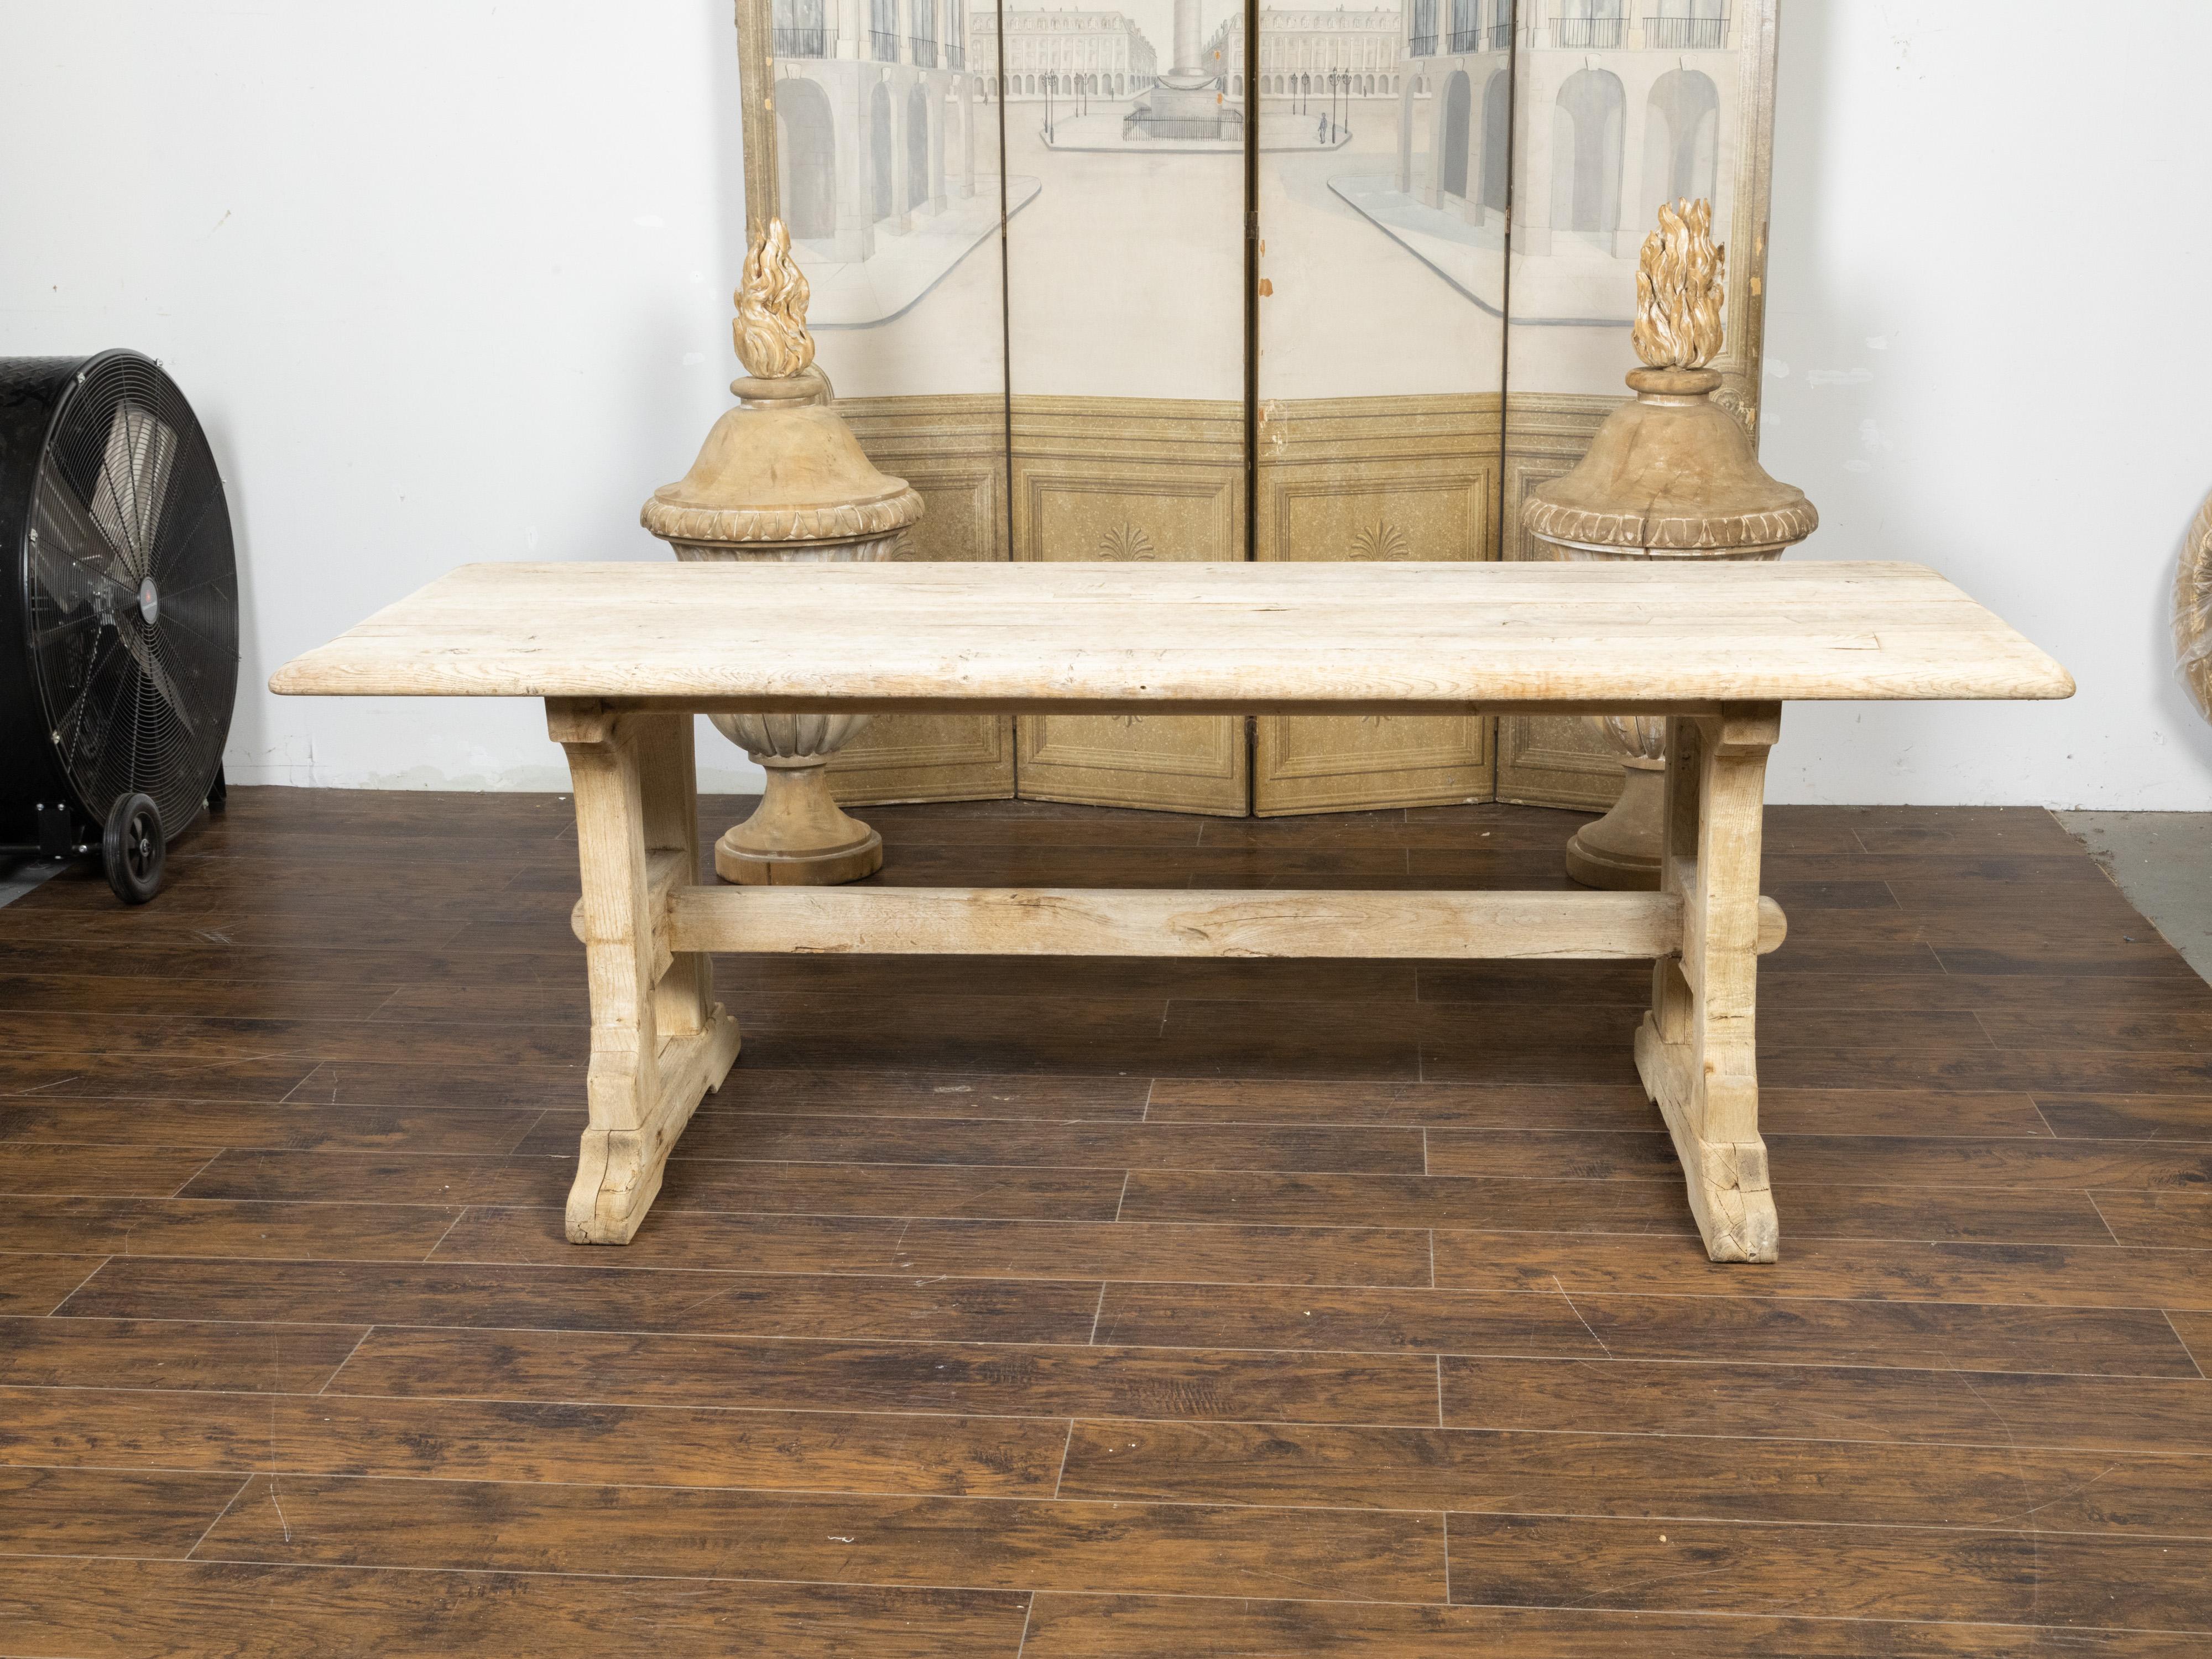 Rustic English 19th Century Natural Wood Farm Table with Trestle Base For Sale 5